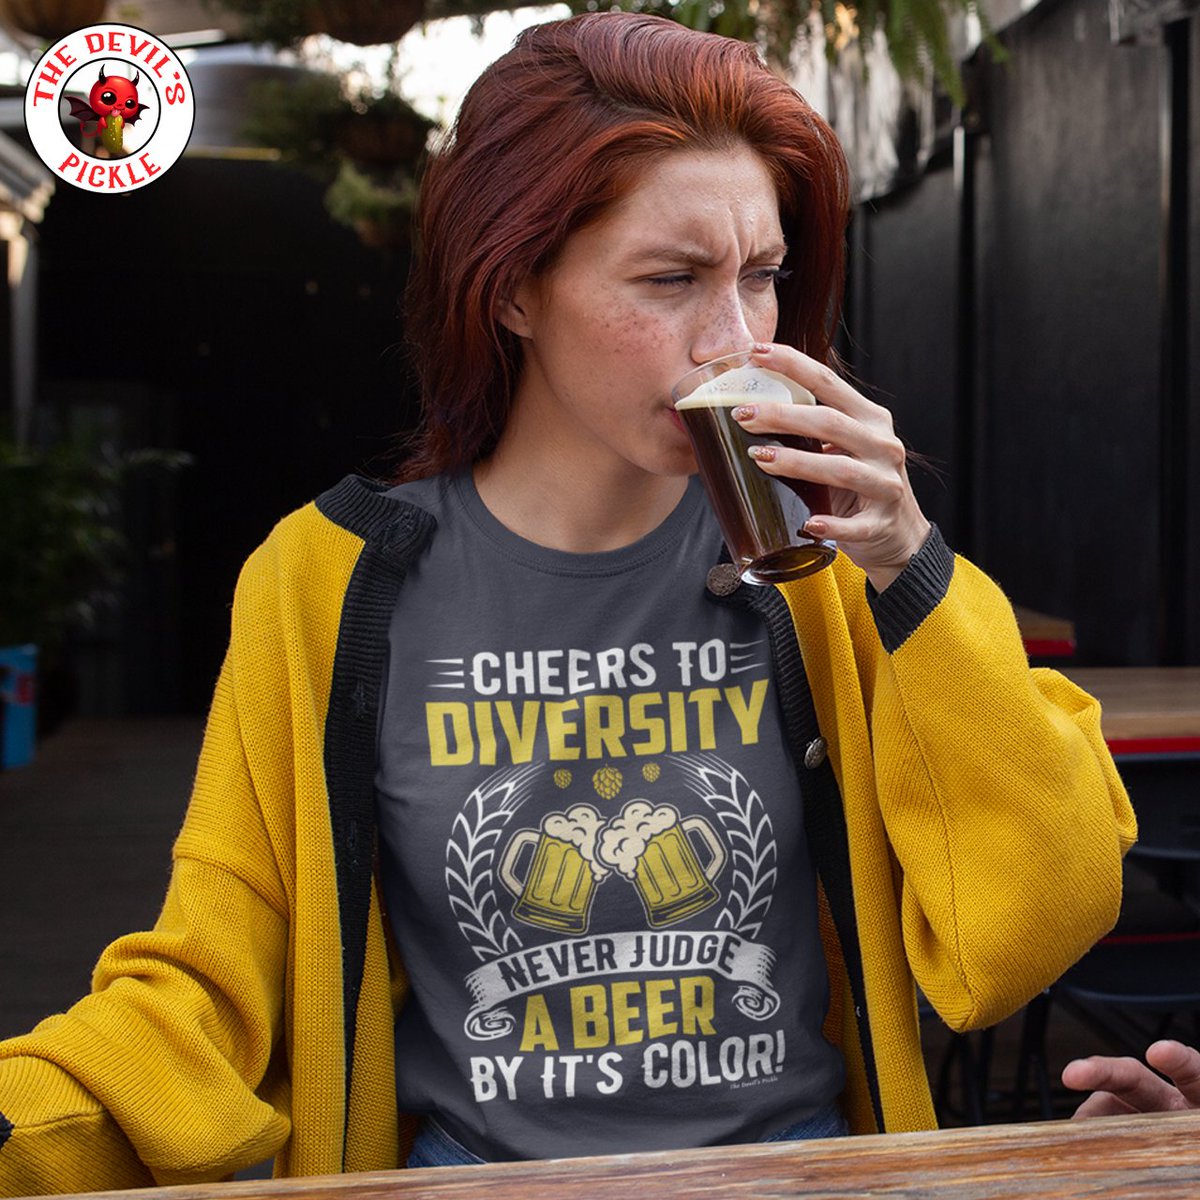 Celebrating the beauty of variety, one sip at a time. The Softest Beer and Boozing Tees at The Devil's Pickle.

#cheerstodiversity #beerandbooze  #adulthumor #ThirstyThursday #daydrinking #SipSipHooray #byob #beeroclock #whiskeyoclock  #beerdrinking #beertshirts #BottomsUp